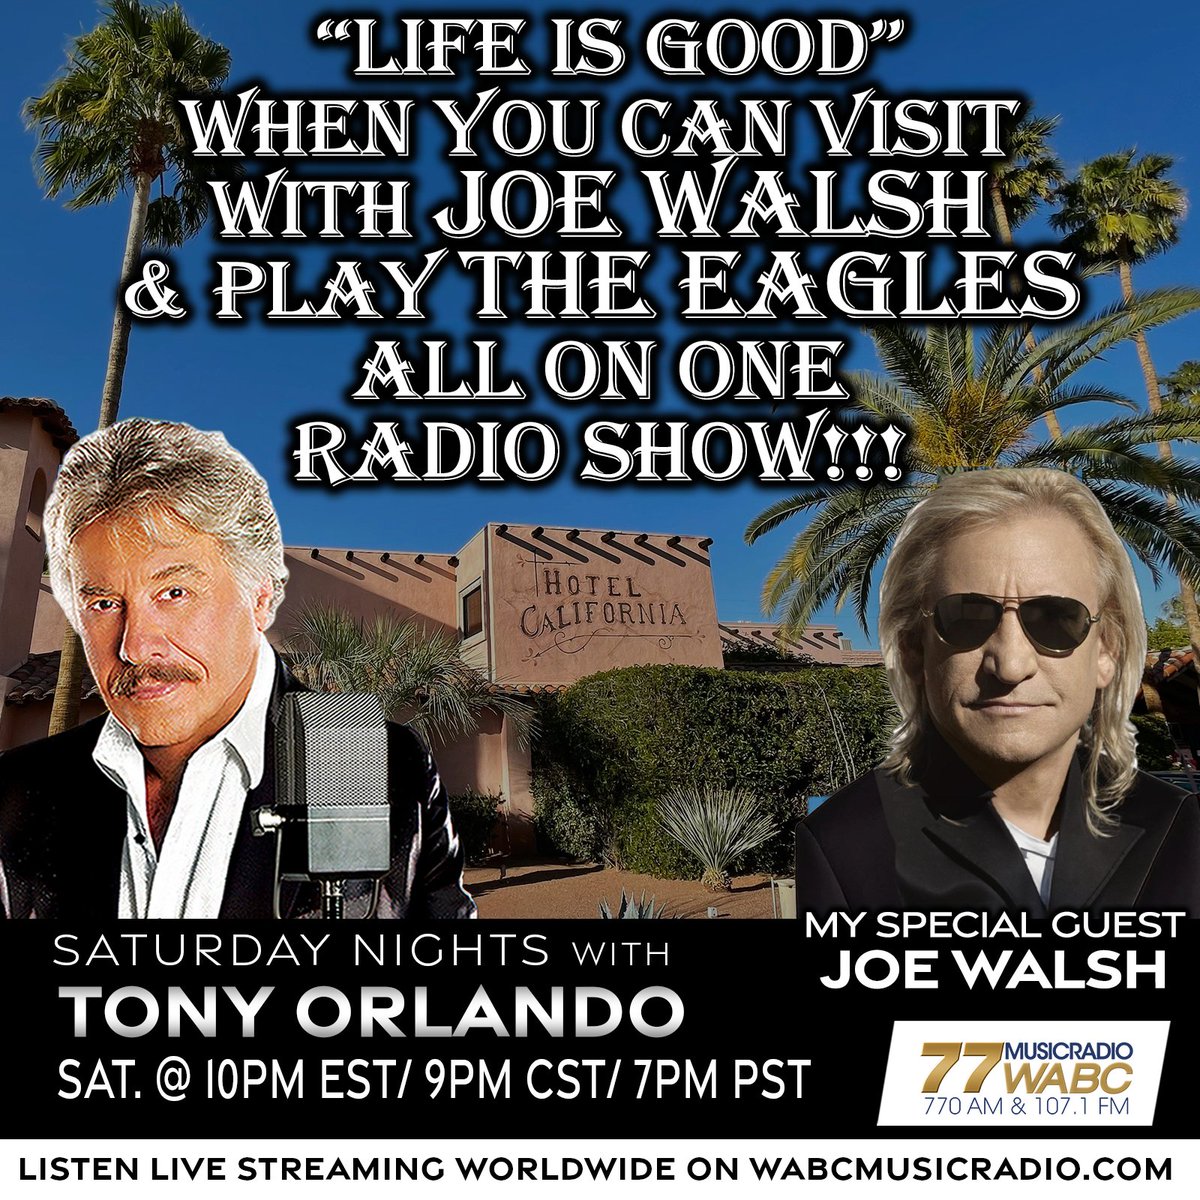 TONIGHT at 10PM: 'Life IS good'! Host @TonyOrlando will have special guest Joe Walsh on the show! Join us TONIGHT from 10PM-midnight on wabcmusicradio.com, 770 AM, or on the 77 WABC app! #77WABCRadio #Music #TonyOrlando